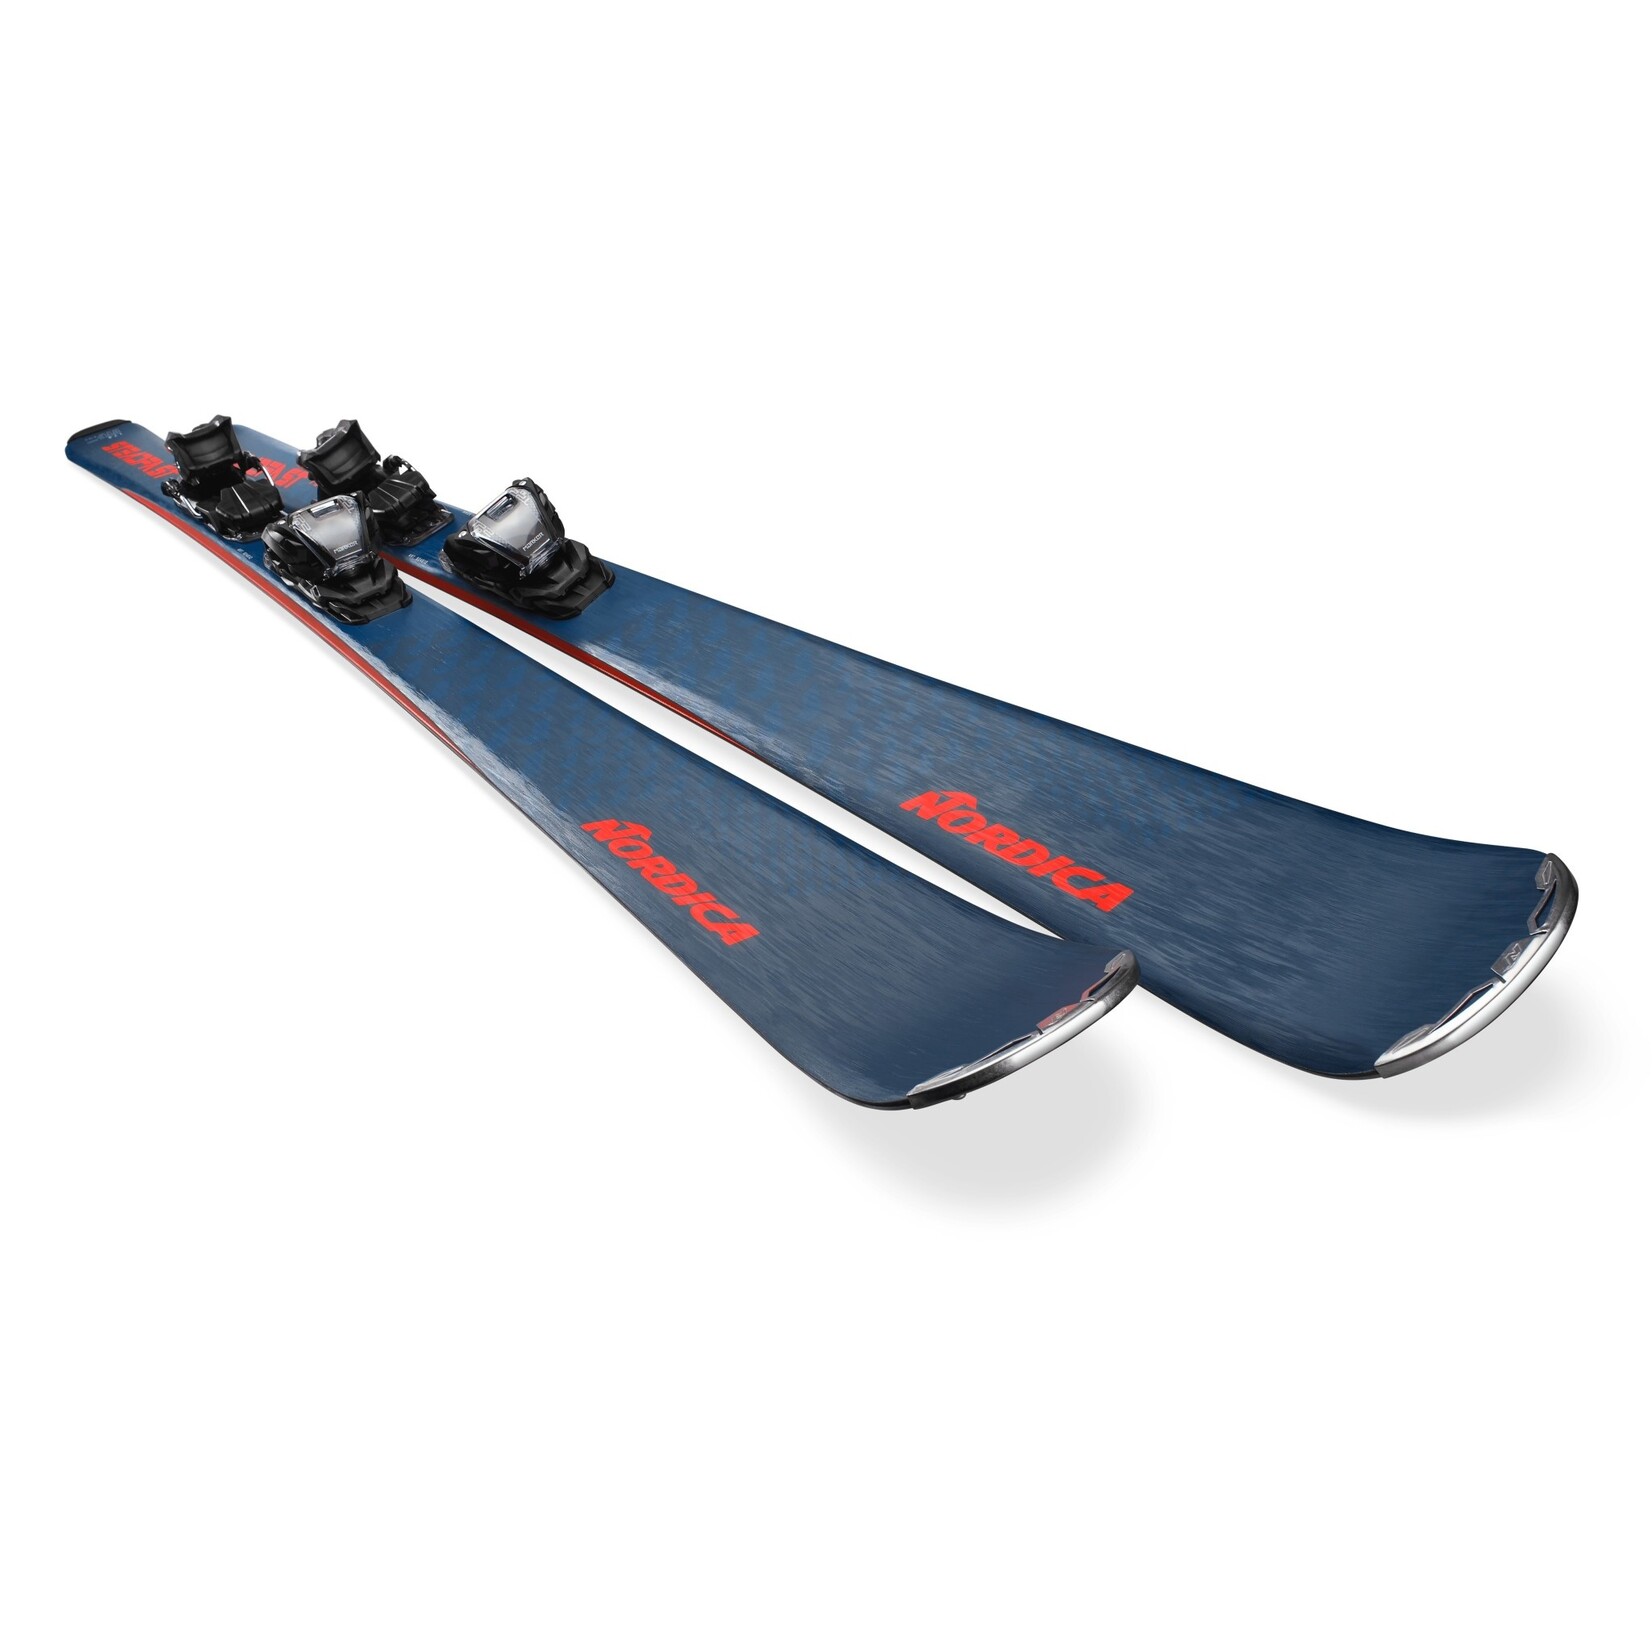 Nordica STEADFAST 75 + TP2 COMPACT 10 BLUE